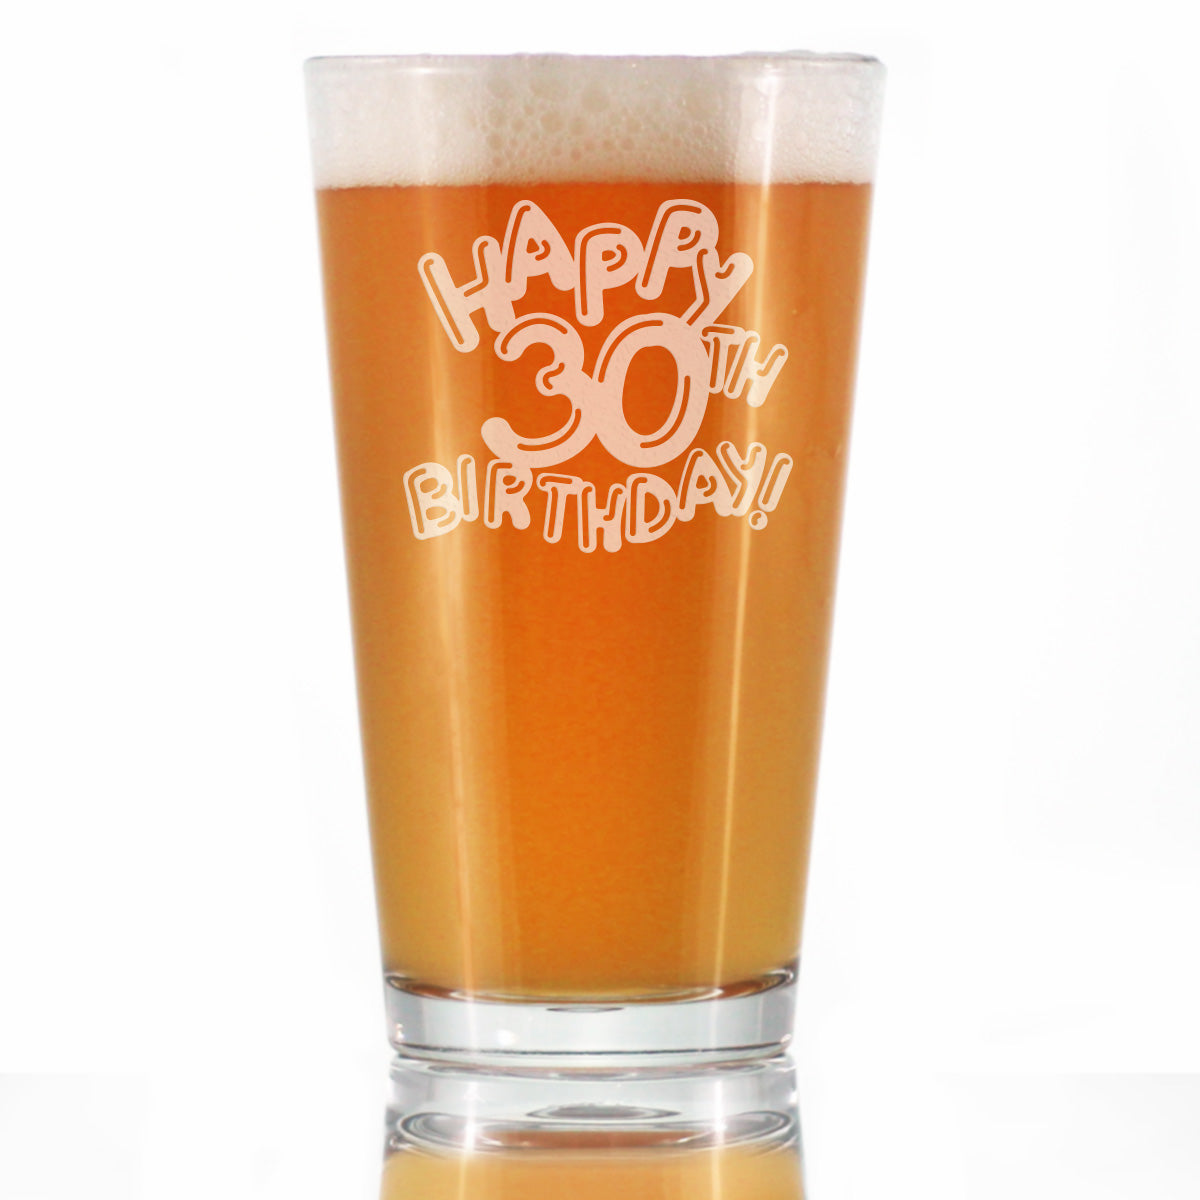 Happy 30th Birthday Balloons - Pint Glass for Beer - Gifts for Women &amp; Men Turning 30 - Fun Bday Party Decor - 16 Oz